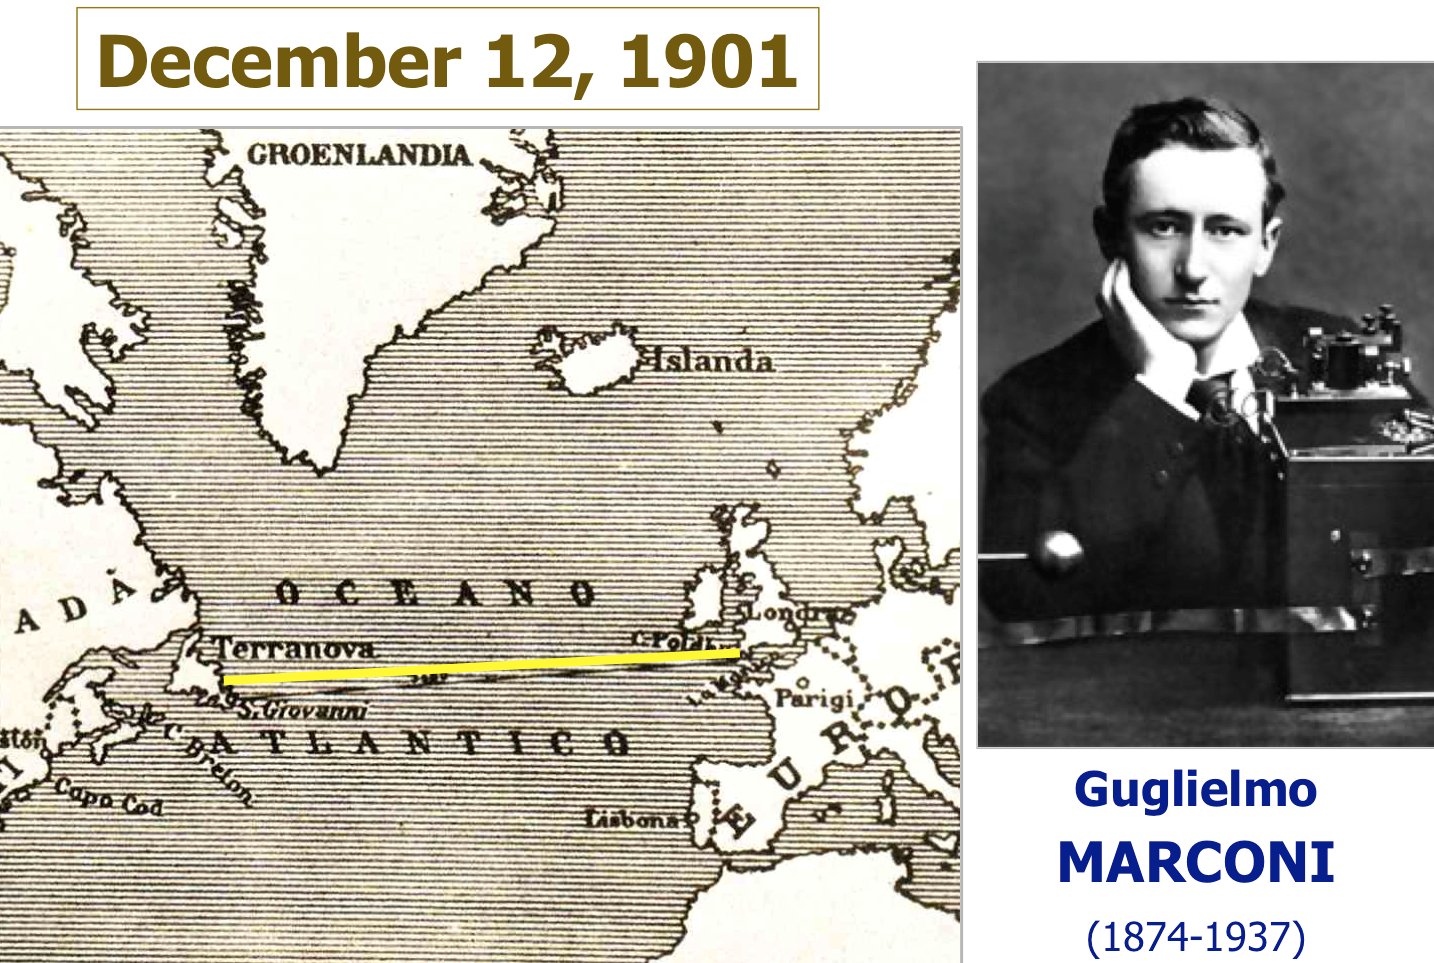 Augusto Beléndez on X: "December 12, 1901: Guglielmo Marconi sent the first transatlantic radio signal from Poldhu in Cornwall, which was received by Percy Wright Page in St John's, Newfoundland. #NobelPrize https://t.co/dYV7iAUbGT